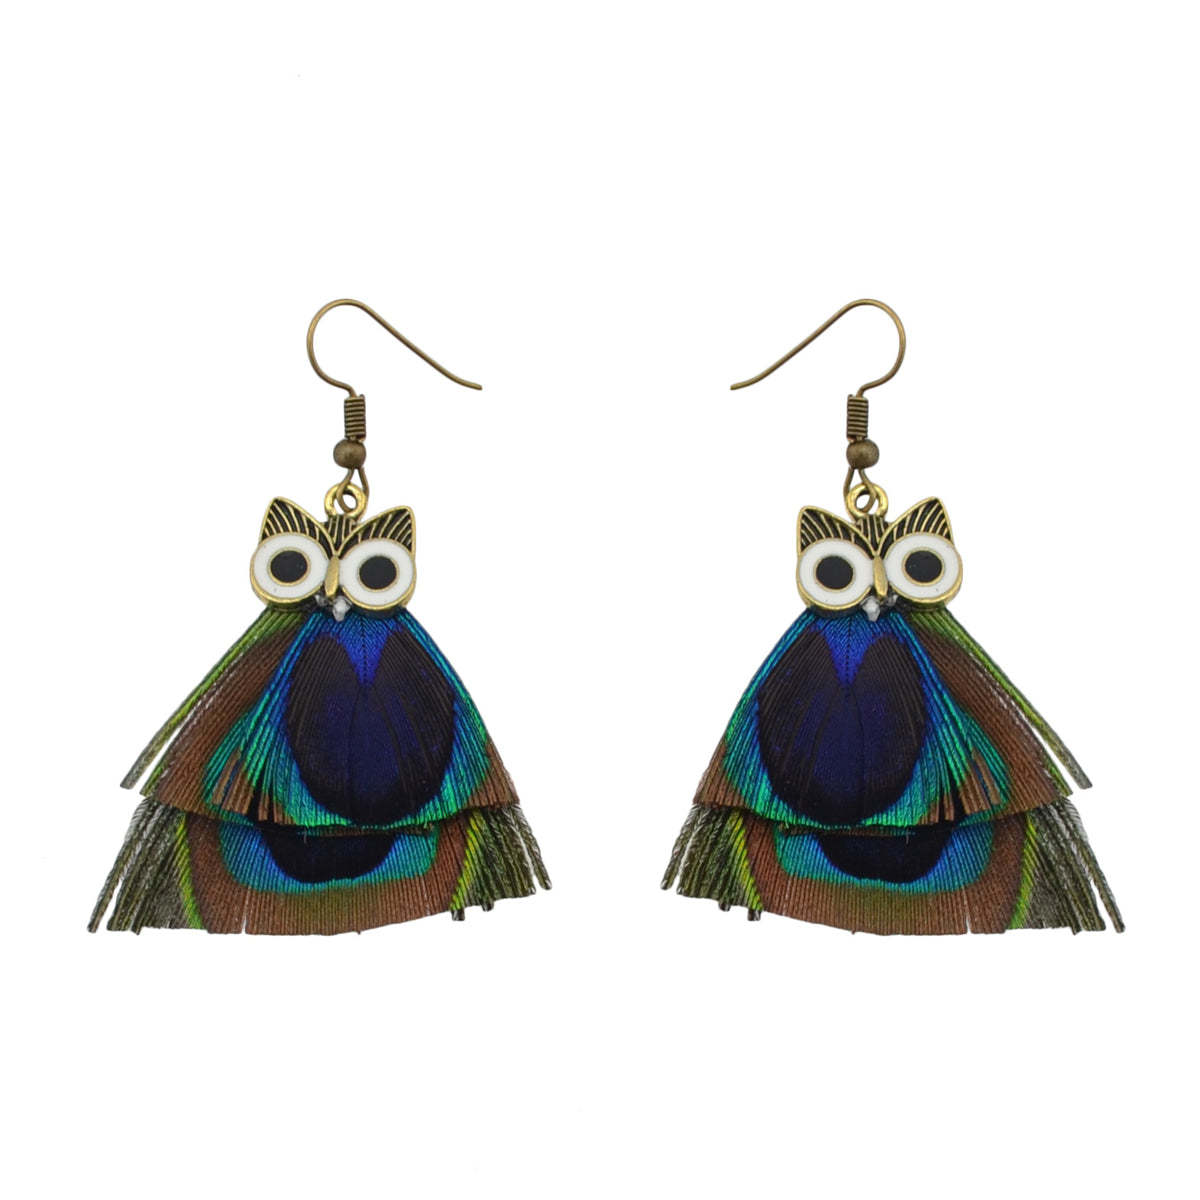 18K Gold-Plated Owl & Feather Drop Earrings - $13.99